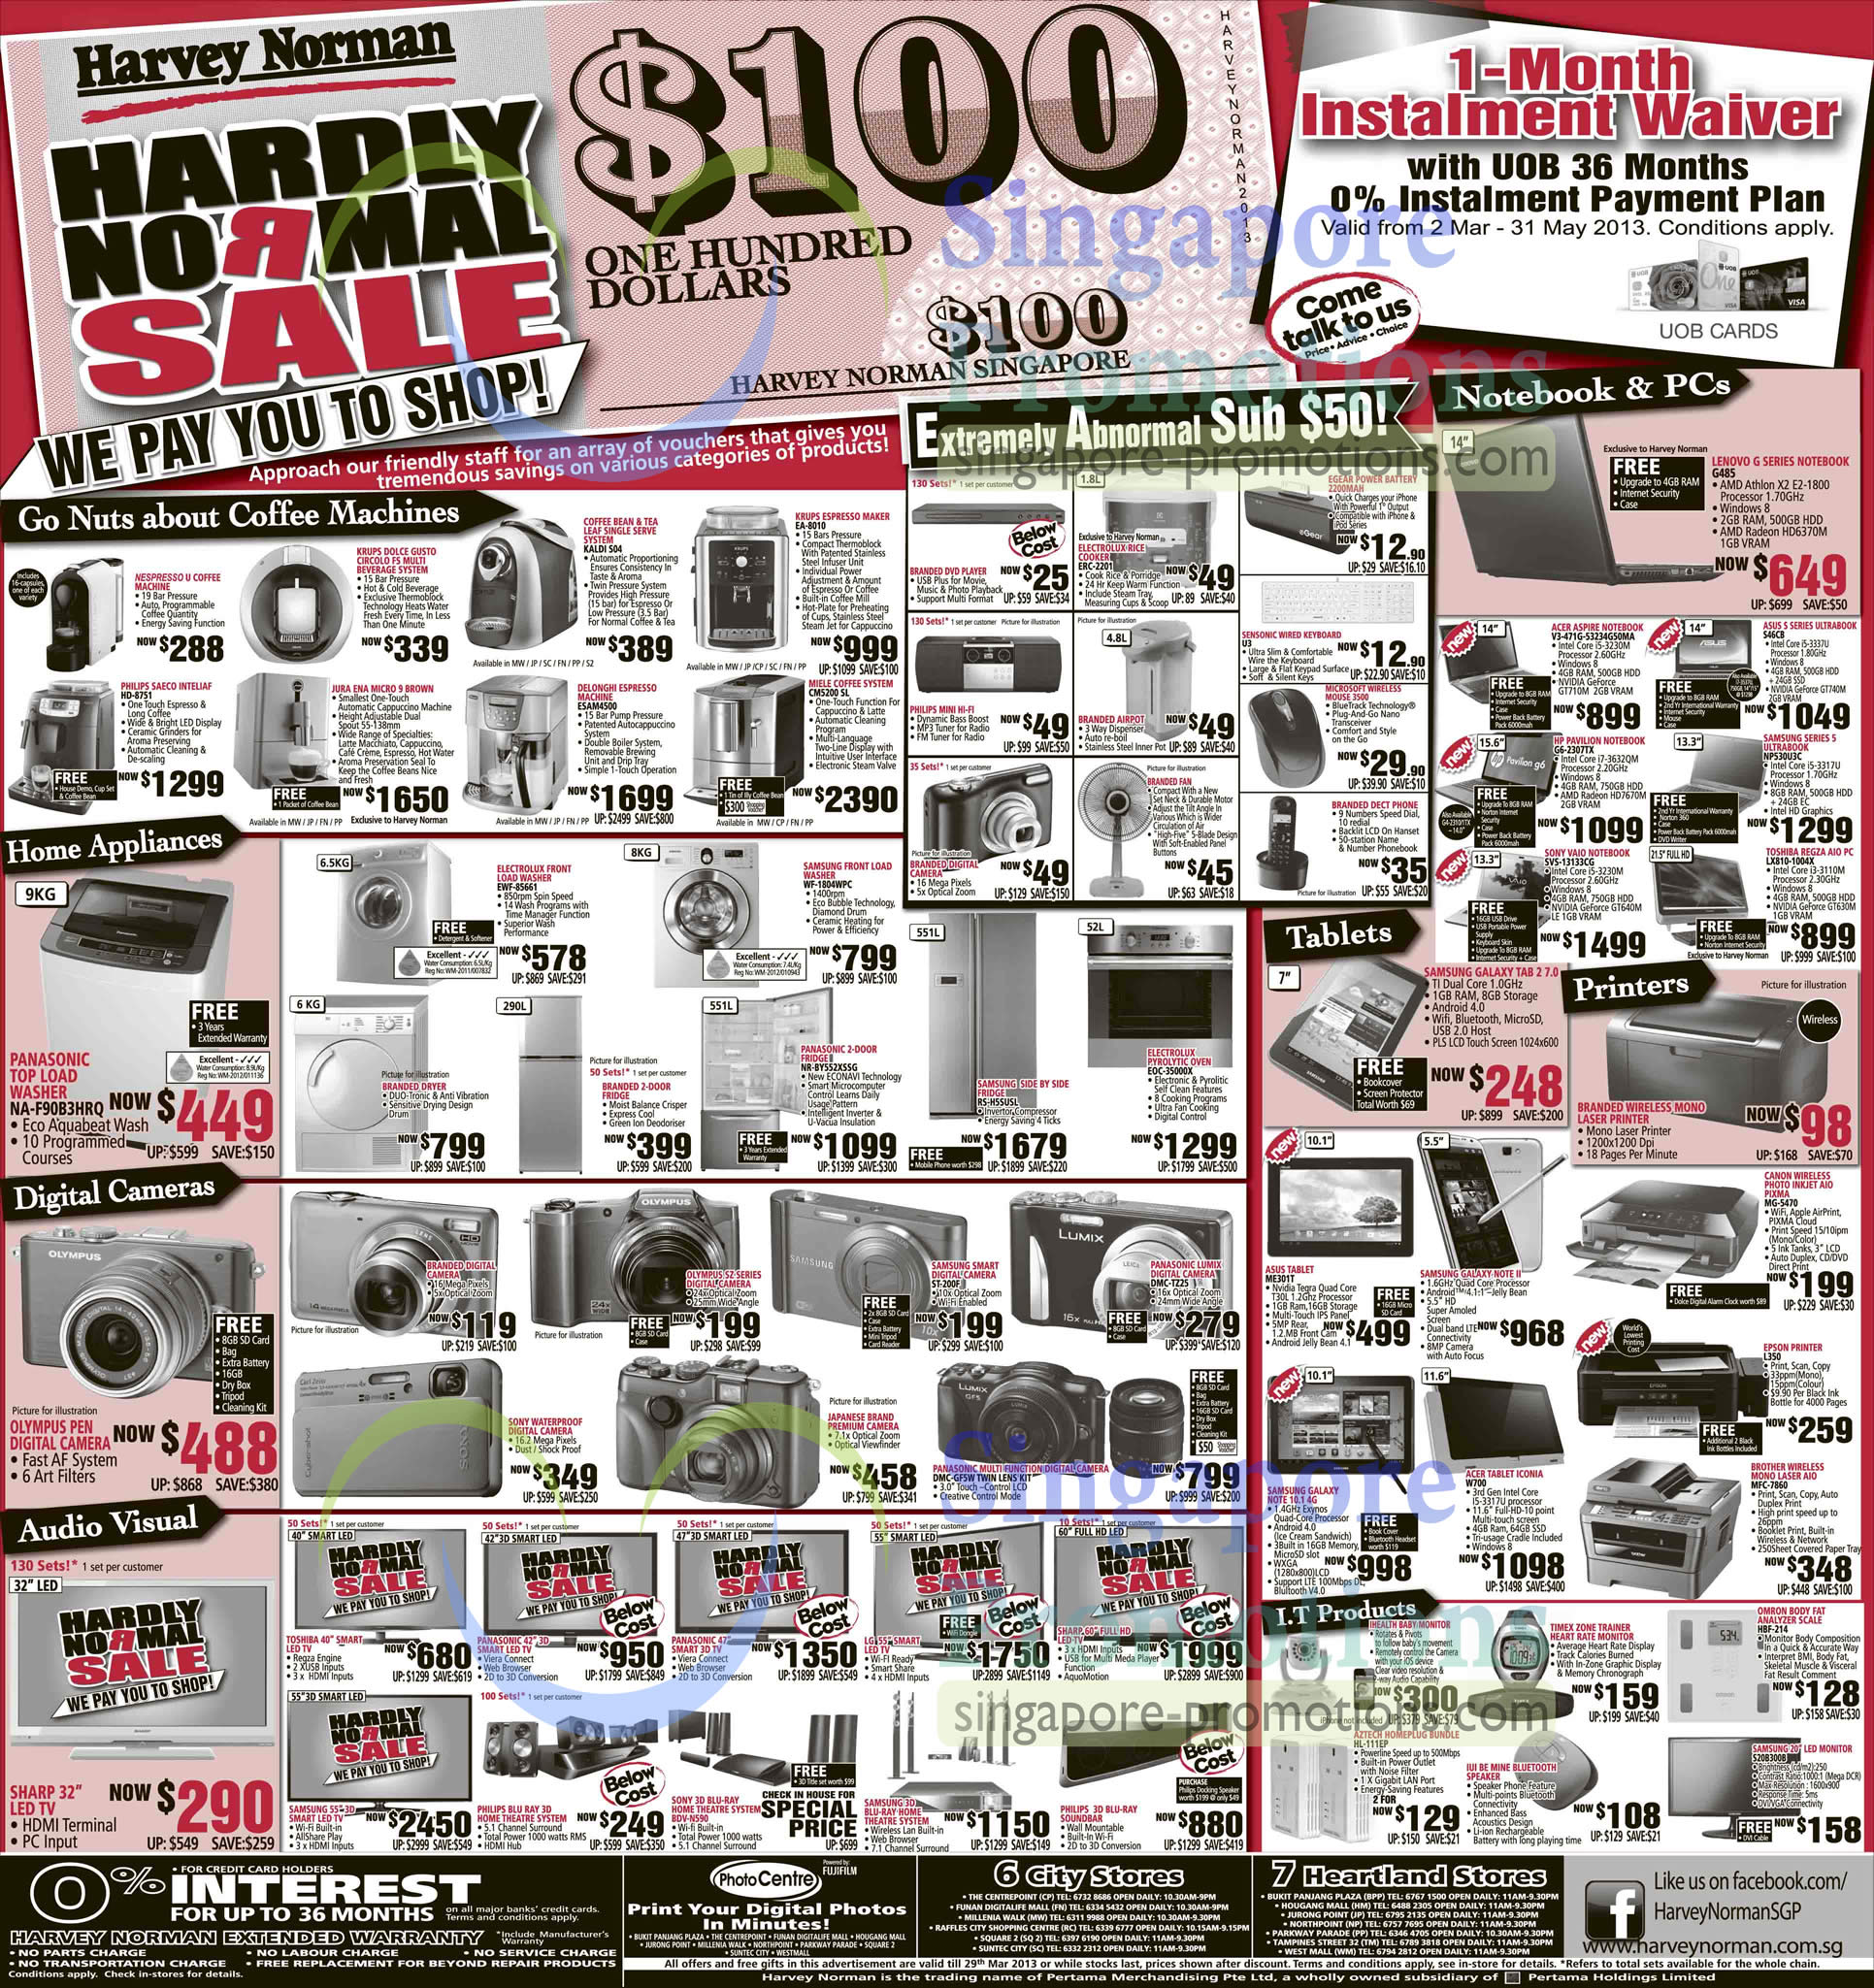 Featured image for Harvey Norman Digital Cameras, Furniture, Notebooks & Appliances Offers 23 - 29 Mar 2013